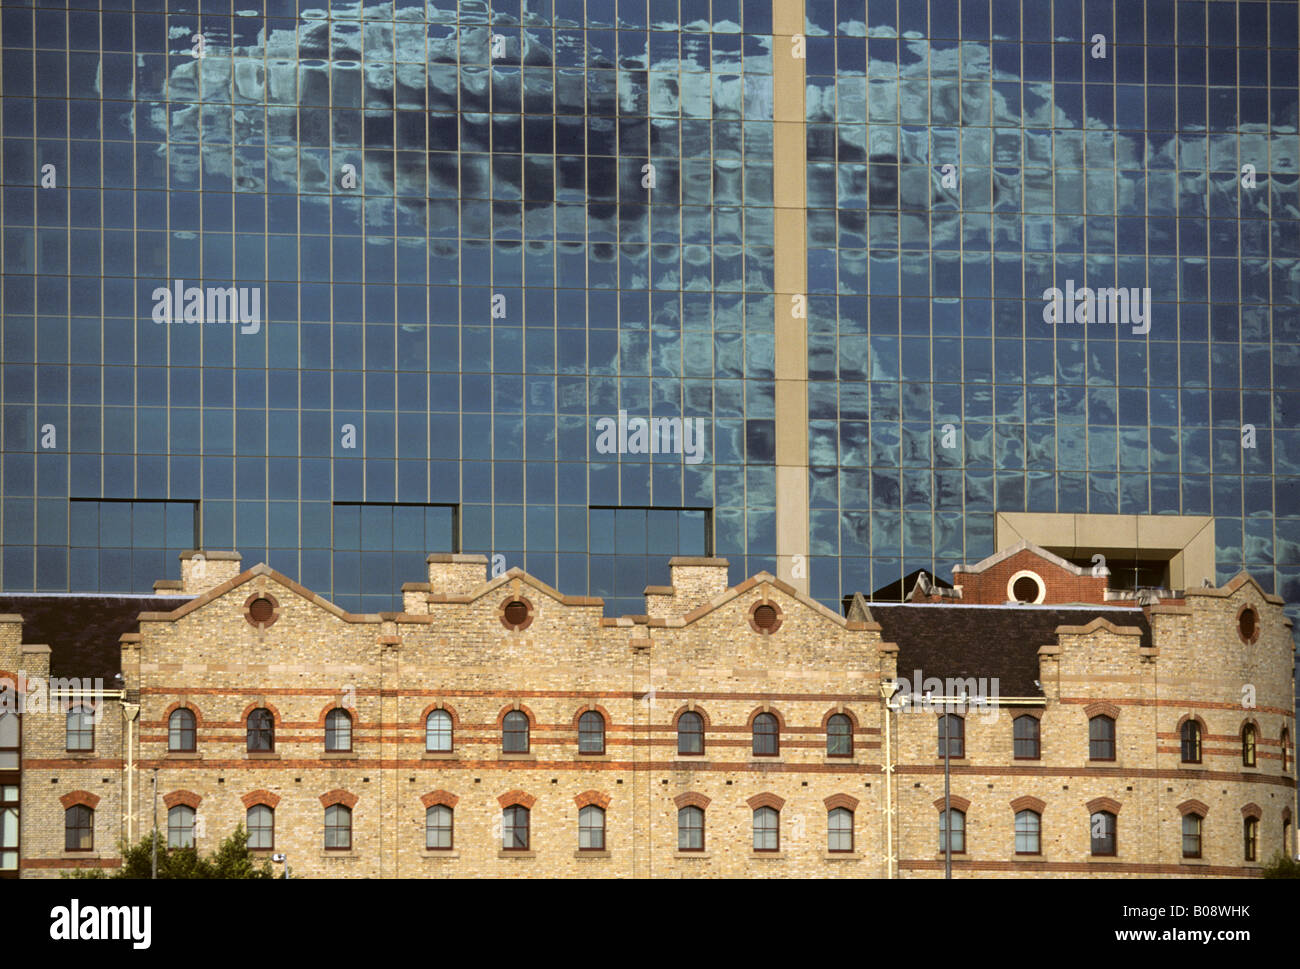 Old harbour building in front of modern glass office building, Darling Harbour, Sydney, New South Wales, Australia Stock Photo